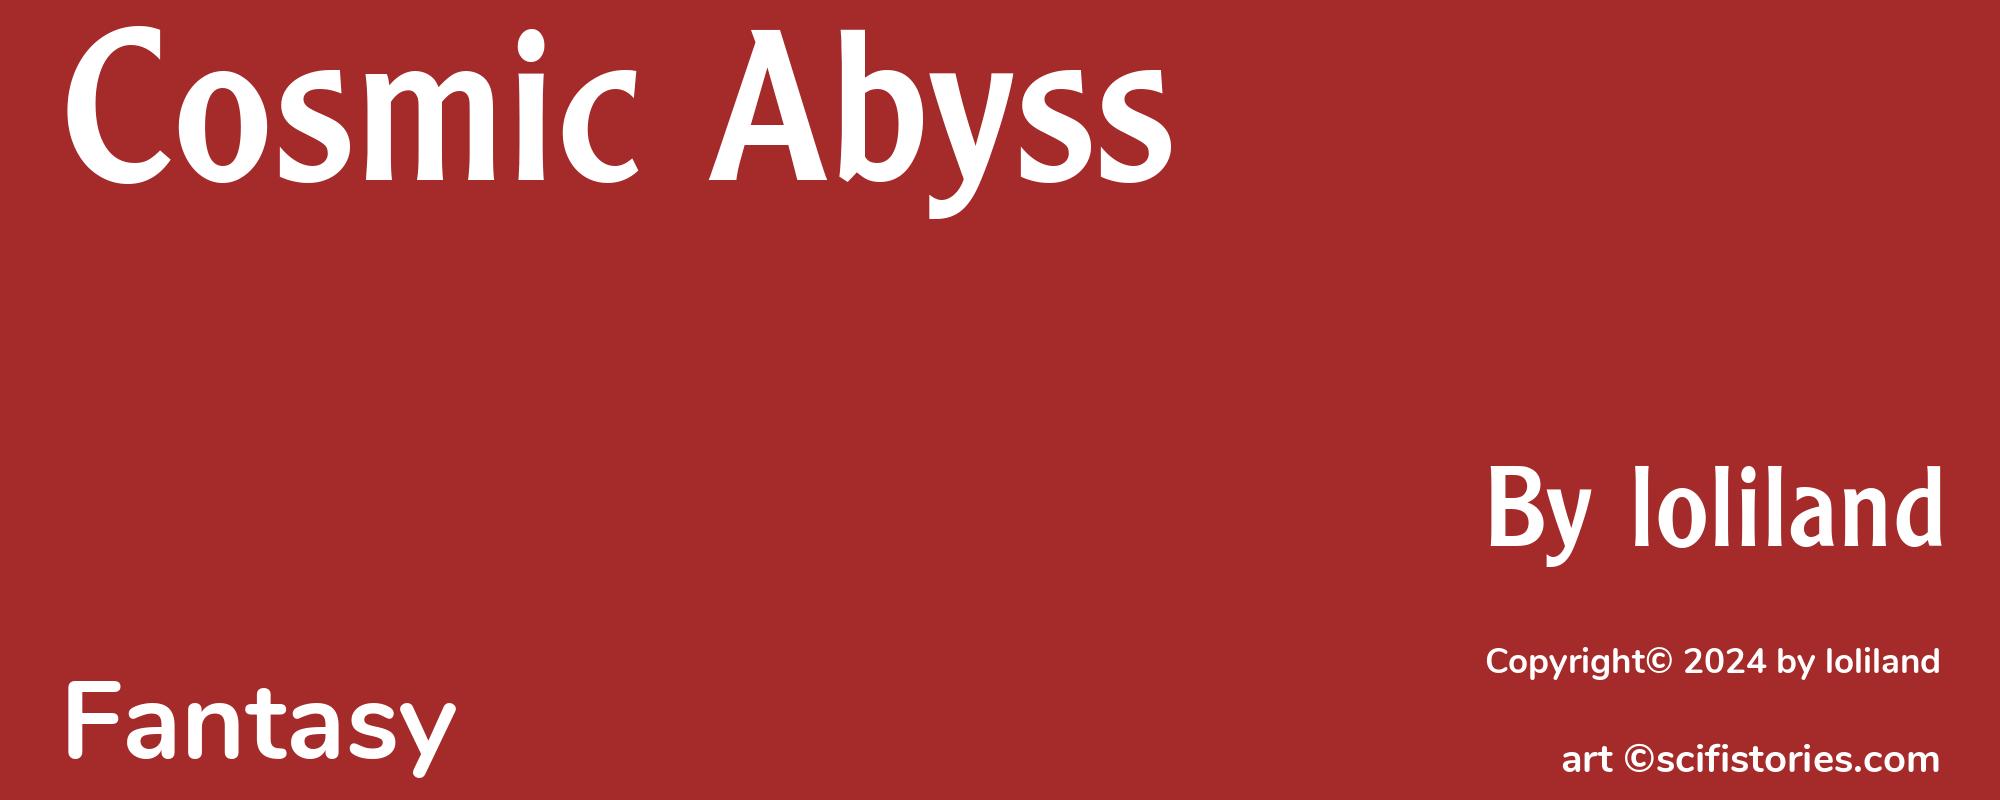 Cosmic Abyss - Cover